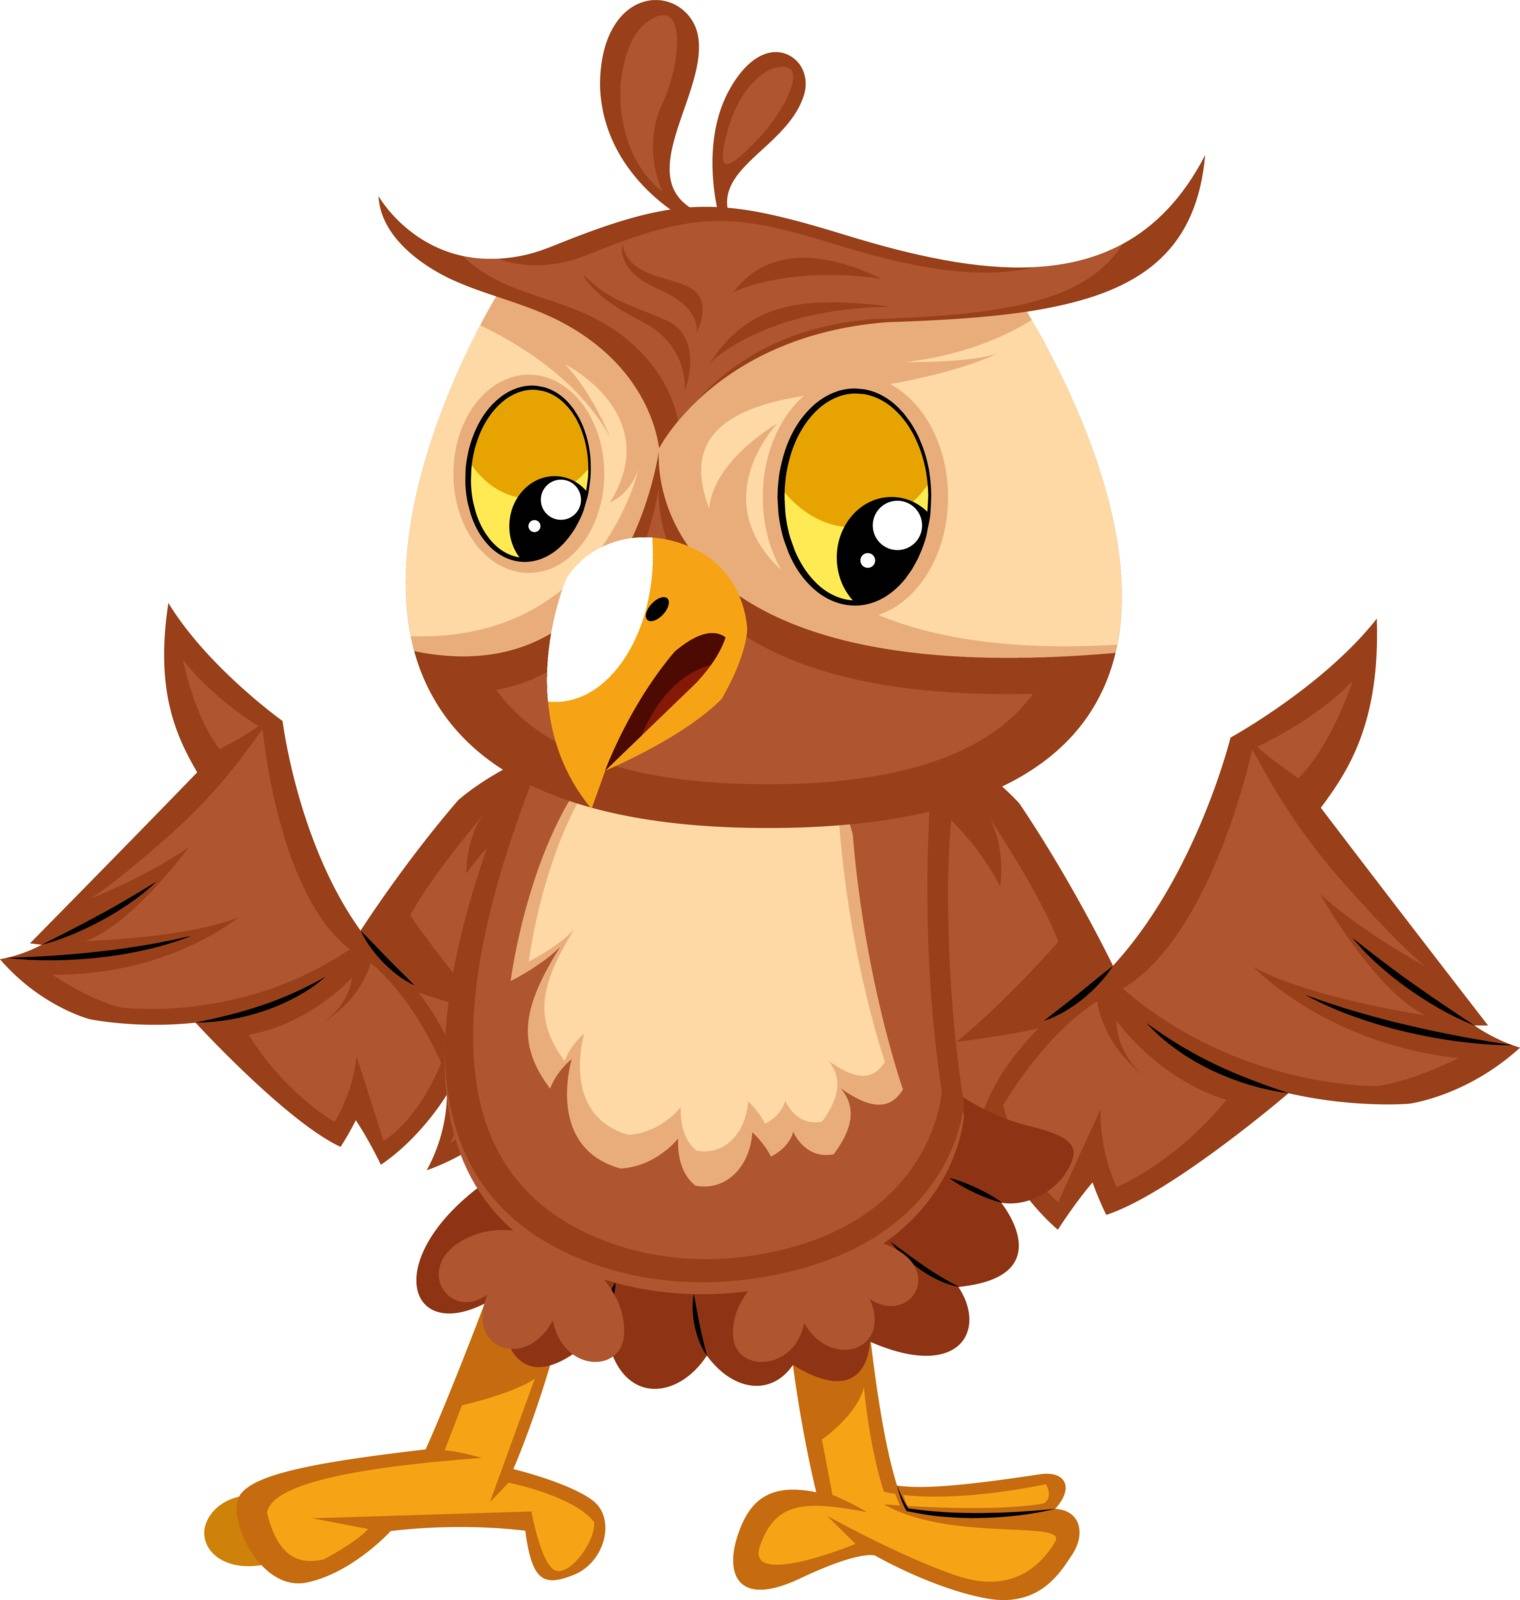 Confused owl, illustration, vector on white background.